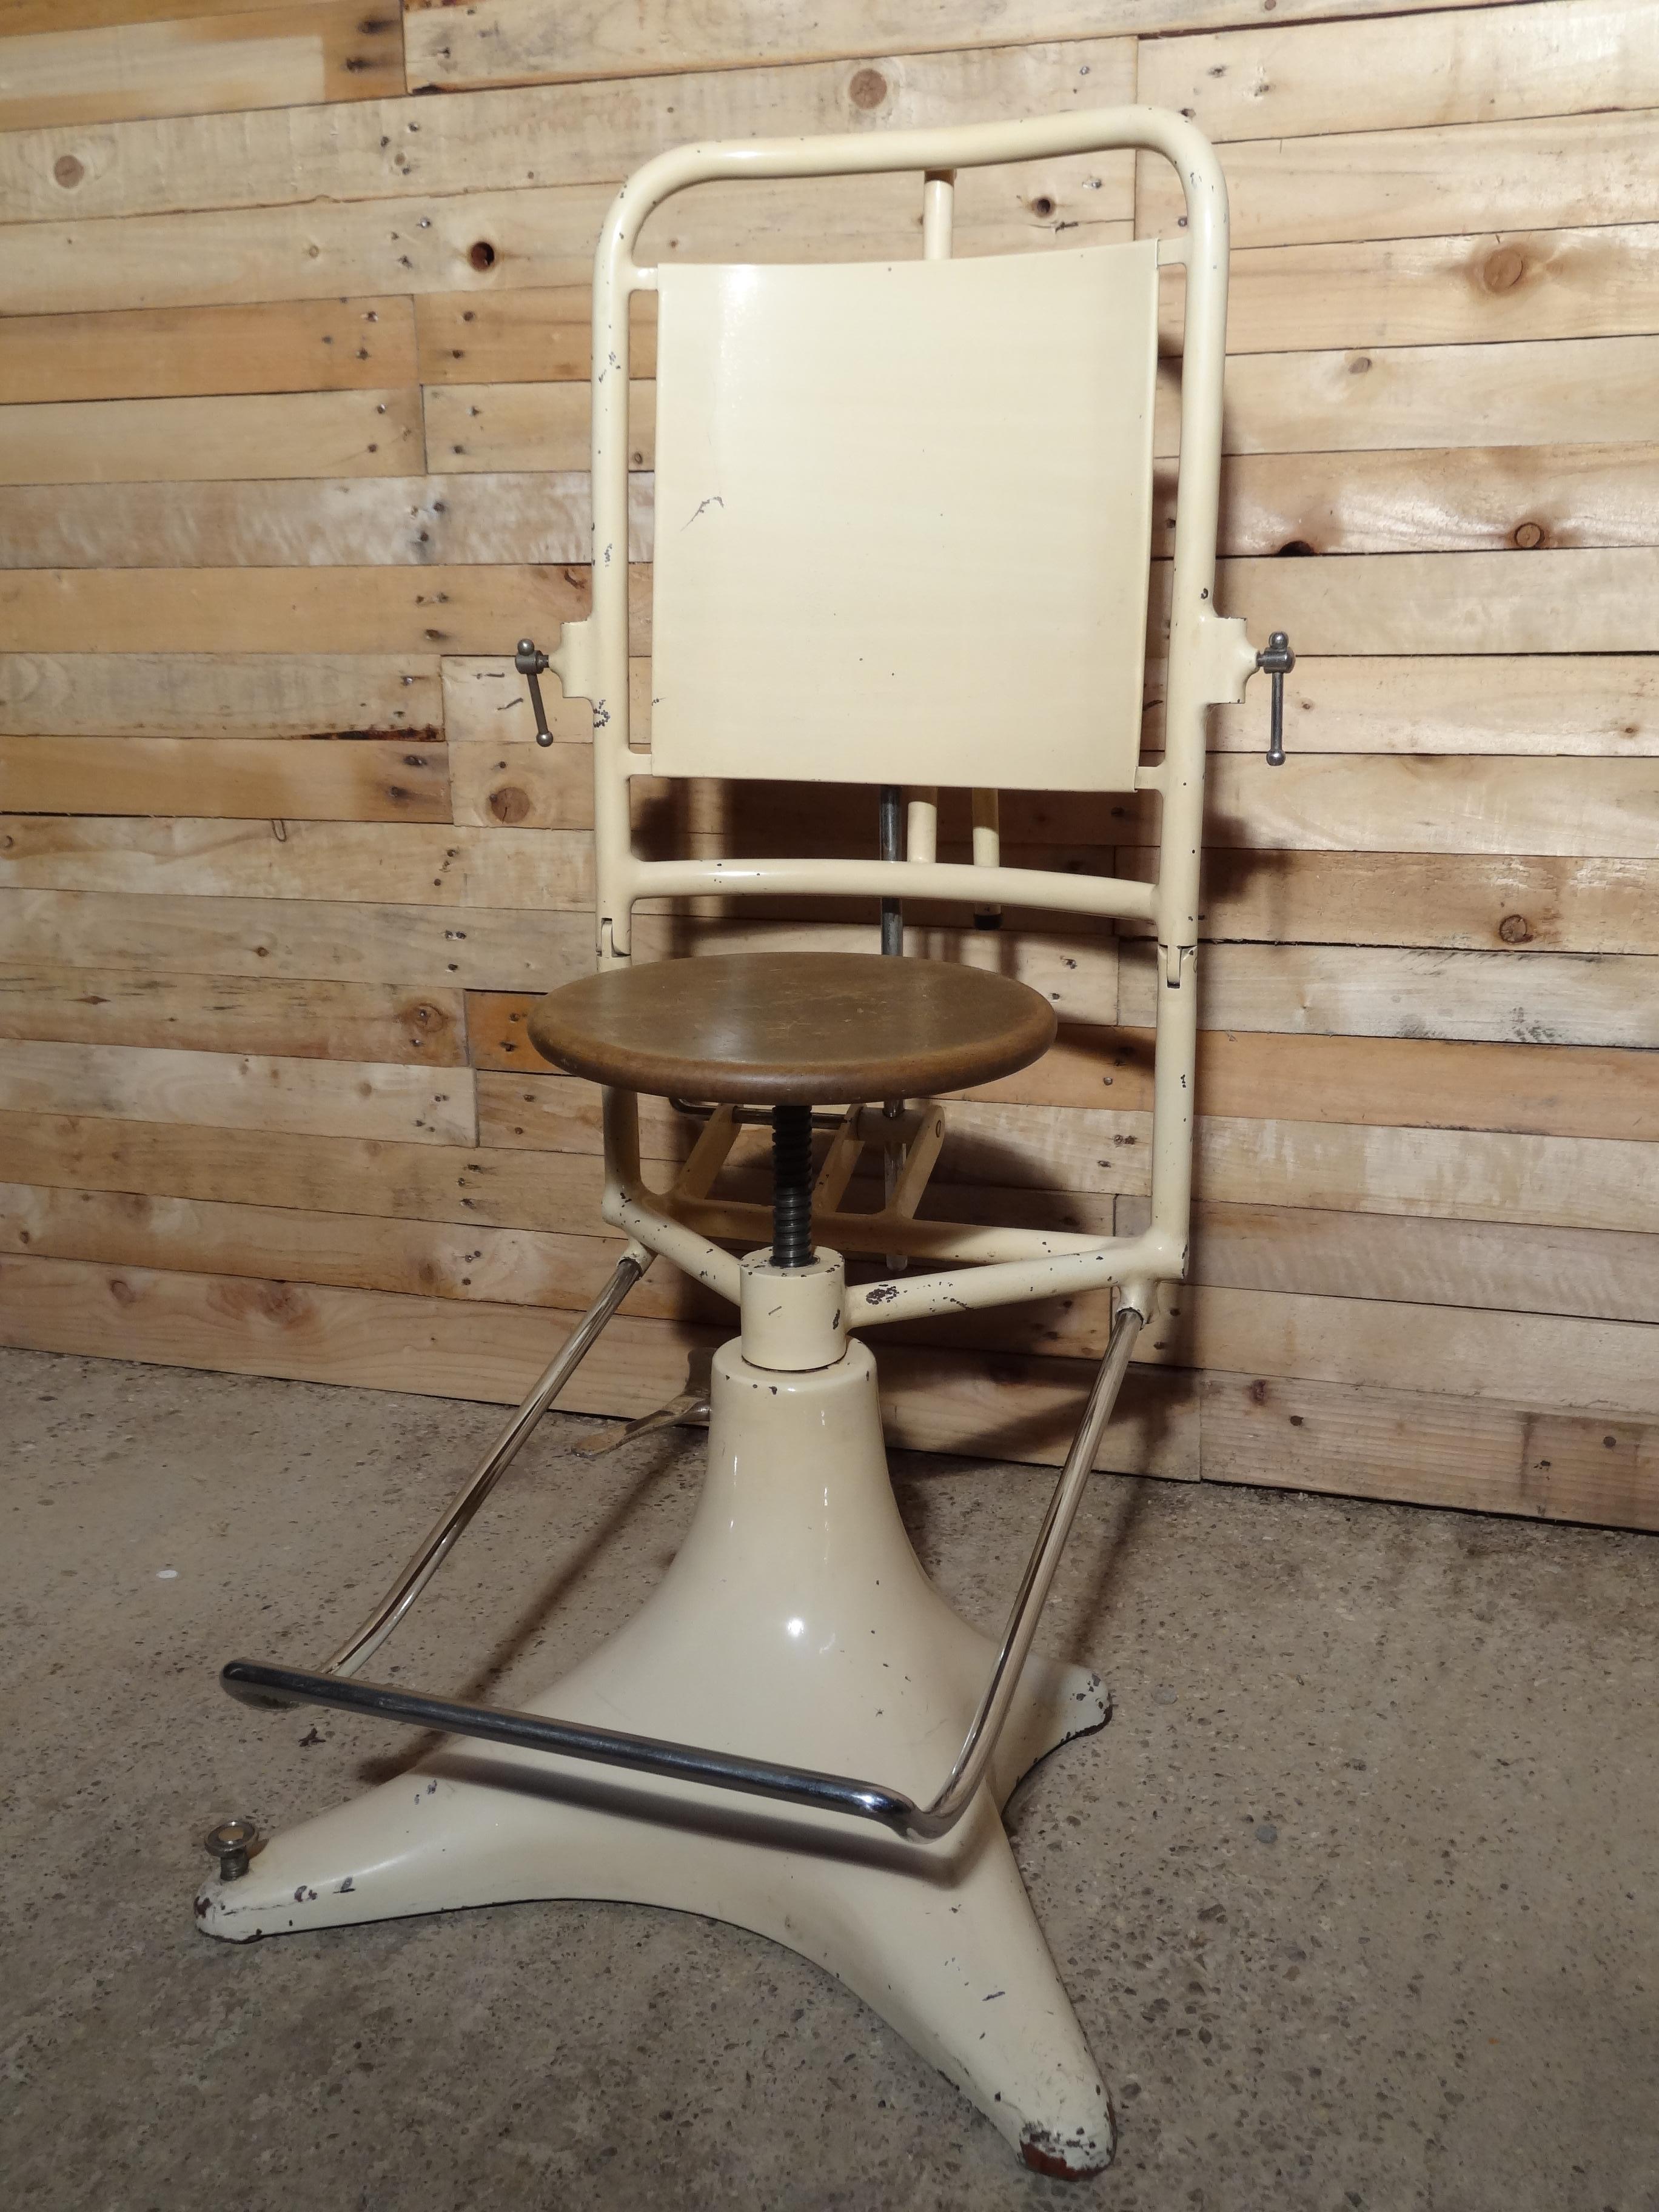 1850 French adjustable metal dentist chair

Fantastic French dentist chair, it has a wooden seat, fully adjustable, chair is in great vintage condition. 

Very heavy cast iron! 

Measures: Seat height 53cm, height 103 cm, depth 70cm, width